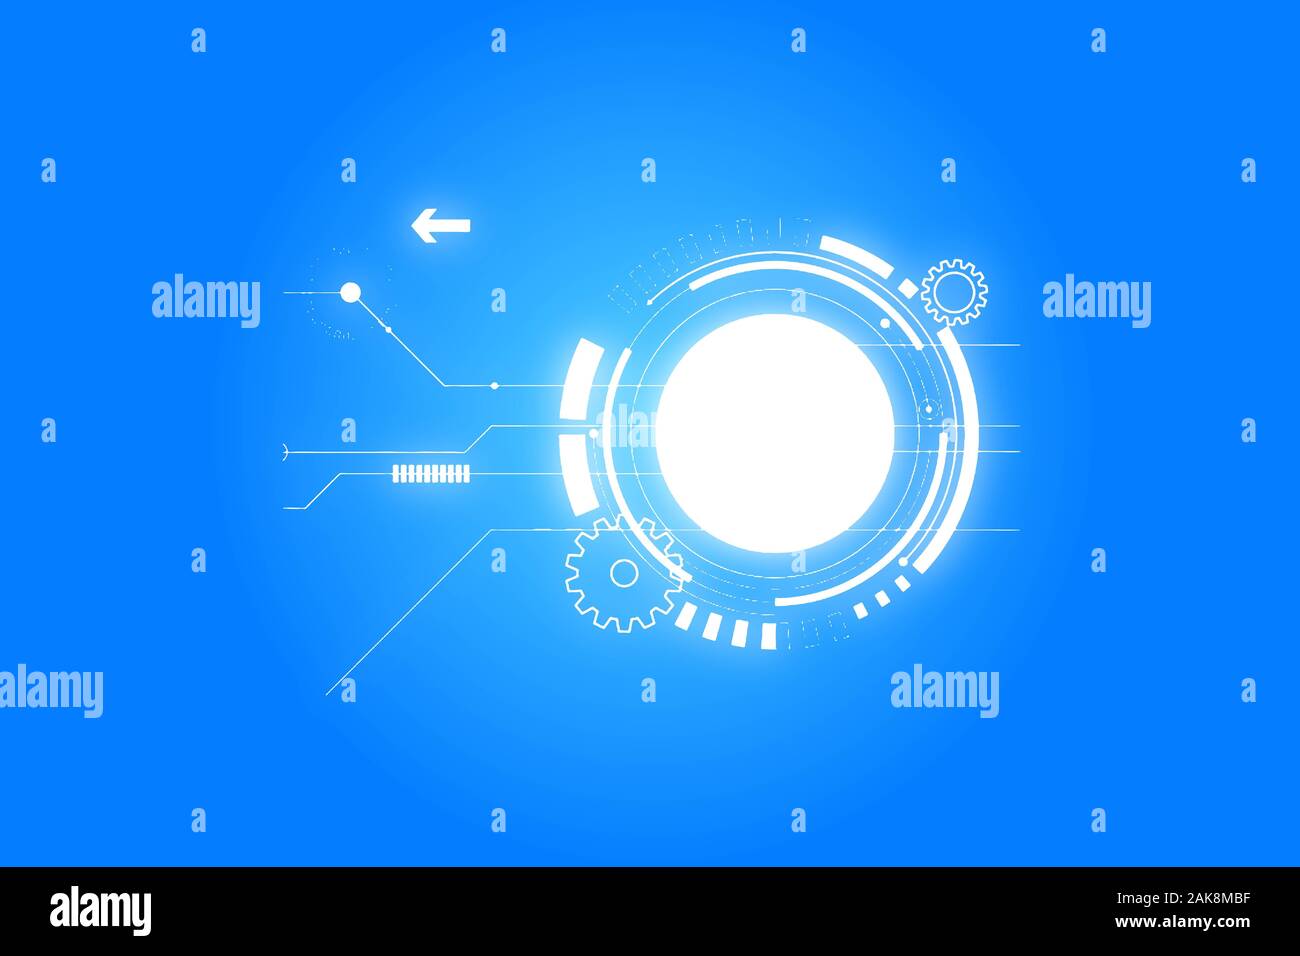 Abstract technology background with various technology elements Hi-tech communication concept innovation background Circle empty space for your text Stock Photo